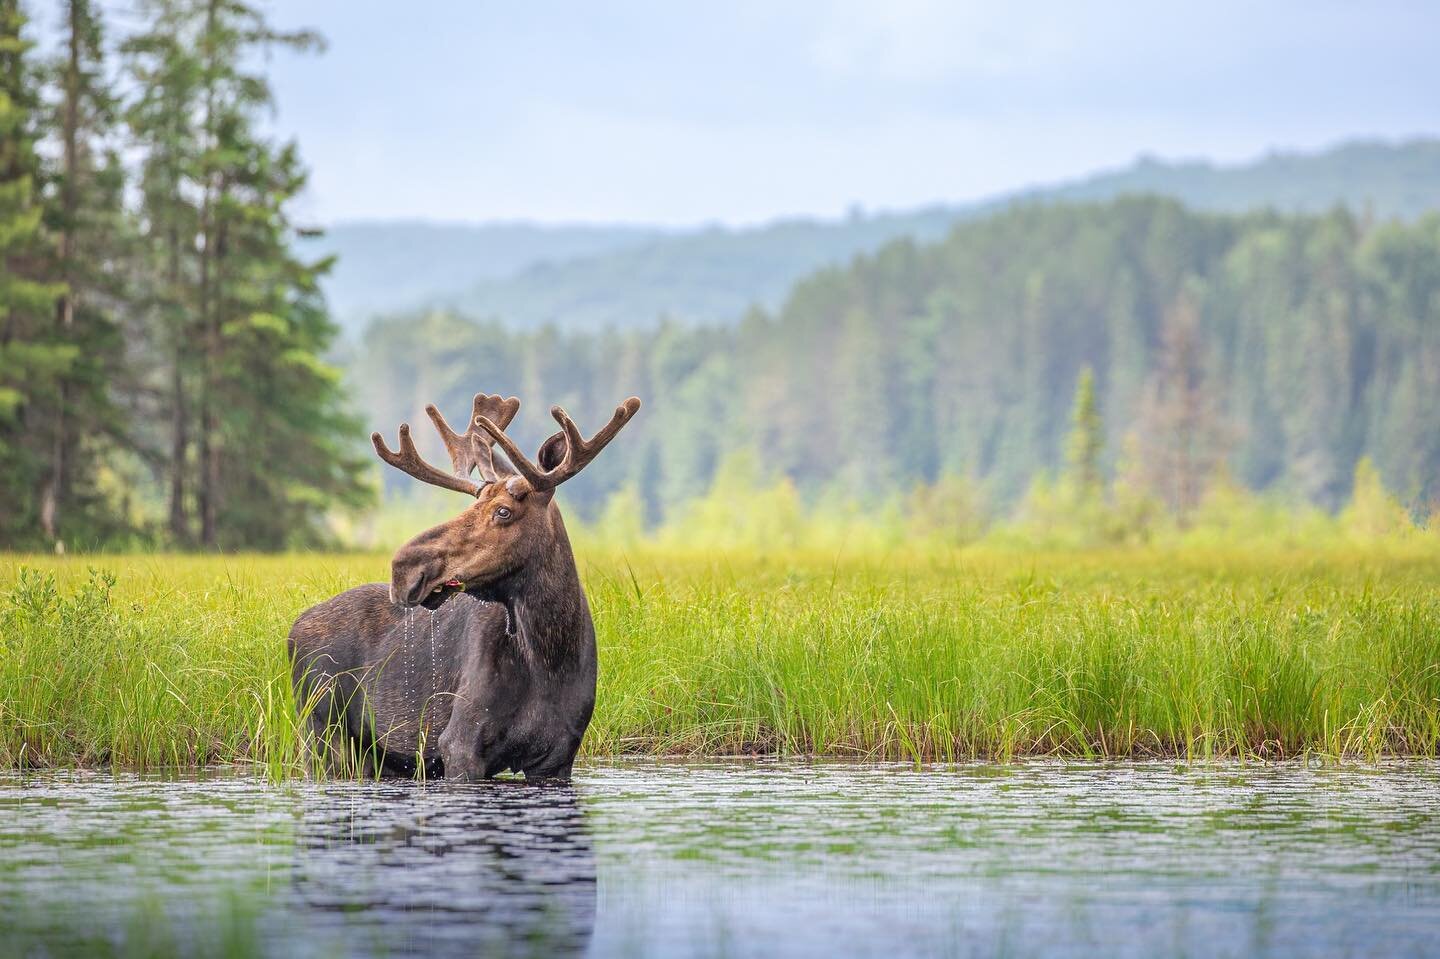 Hello everyone, the @canadianconservation  auction #5 is now live!!! 

We&rsquo;re proud to donate this @followmenorth image and it&rsquo;s now available for bids to support the @Canadianconservation initiative.  This munching moose is available now 